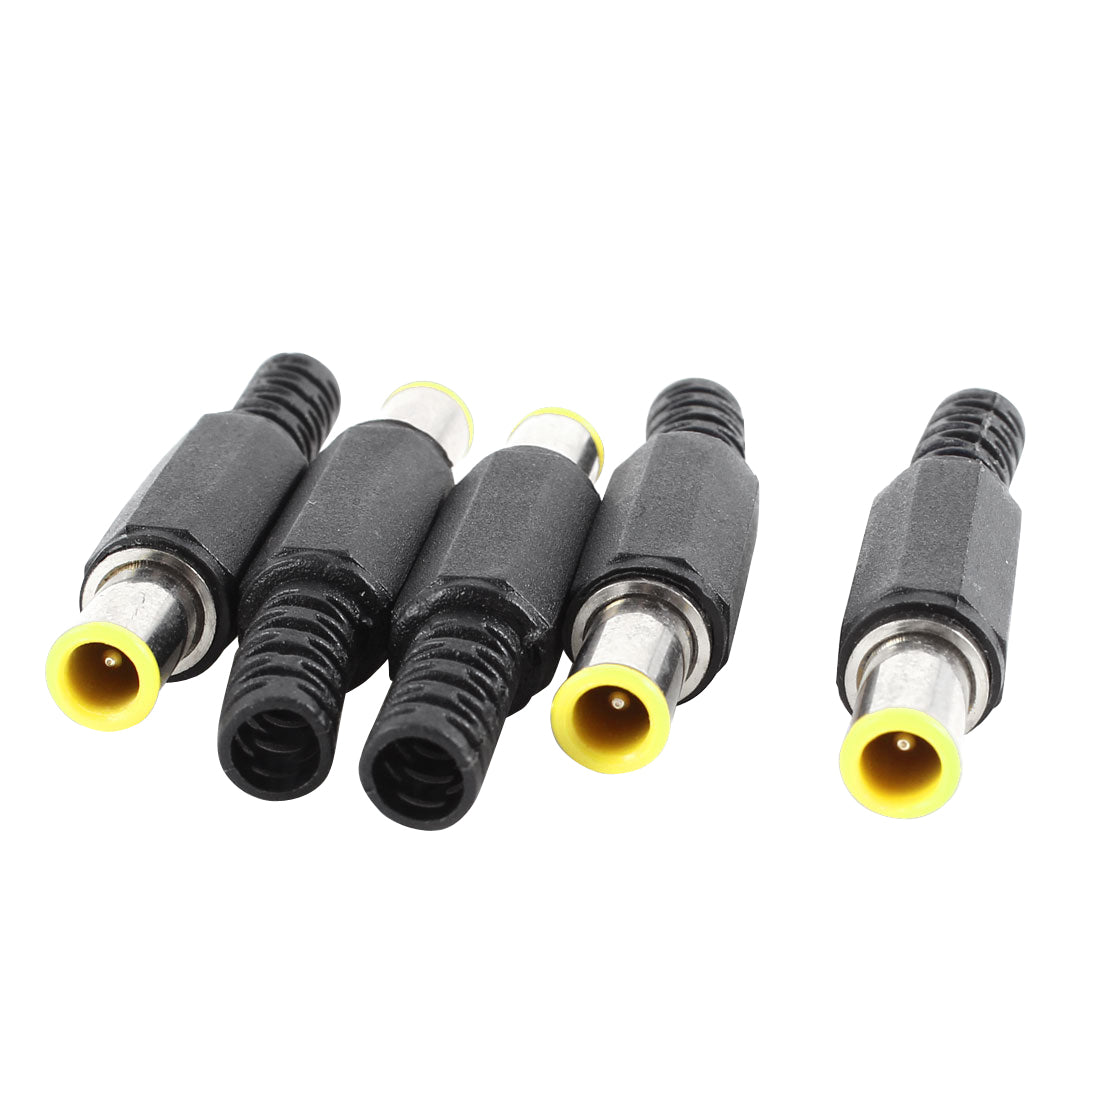 uxcell Uxcell 5Pcs DC Cable Jack Power Supply Male Connector 6 x 4.4mm